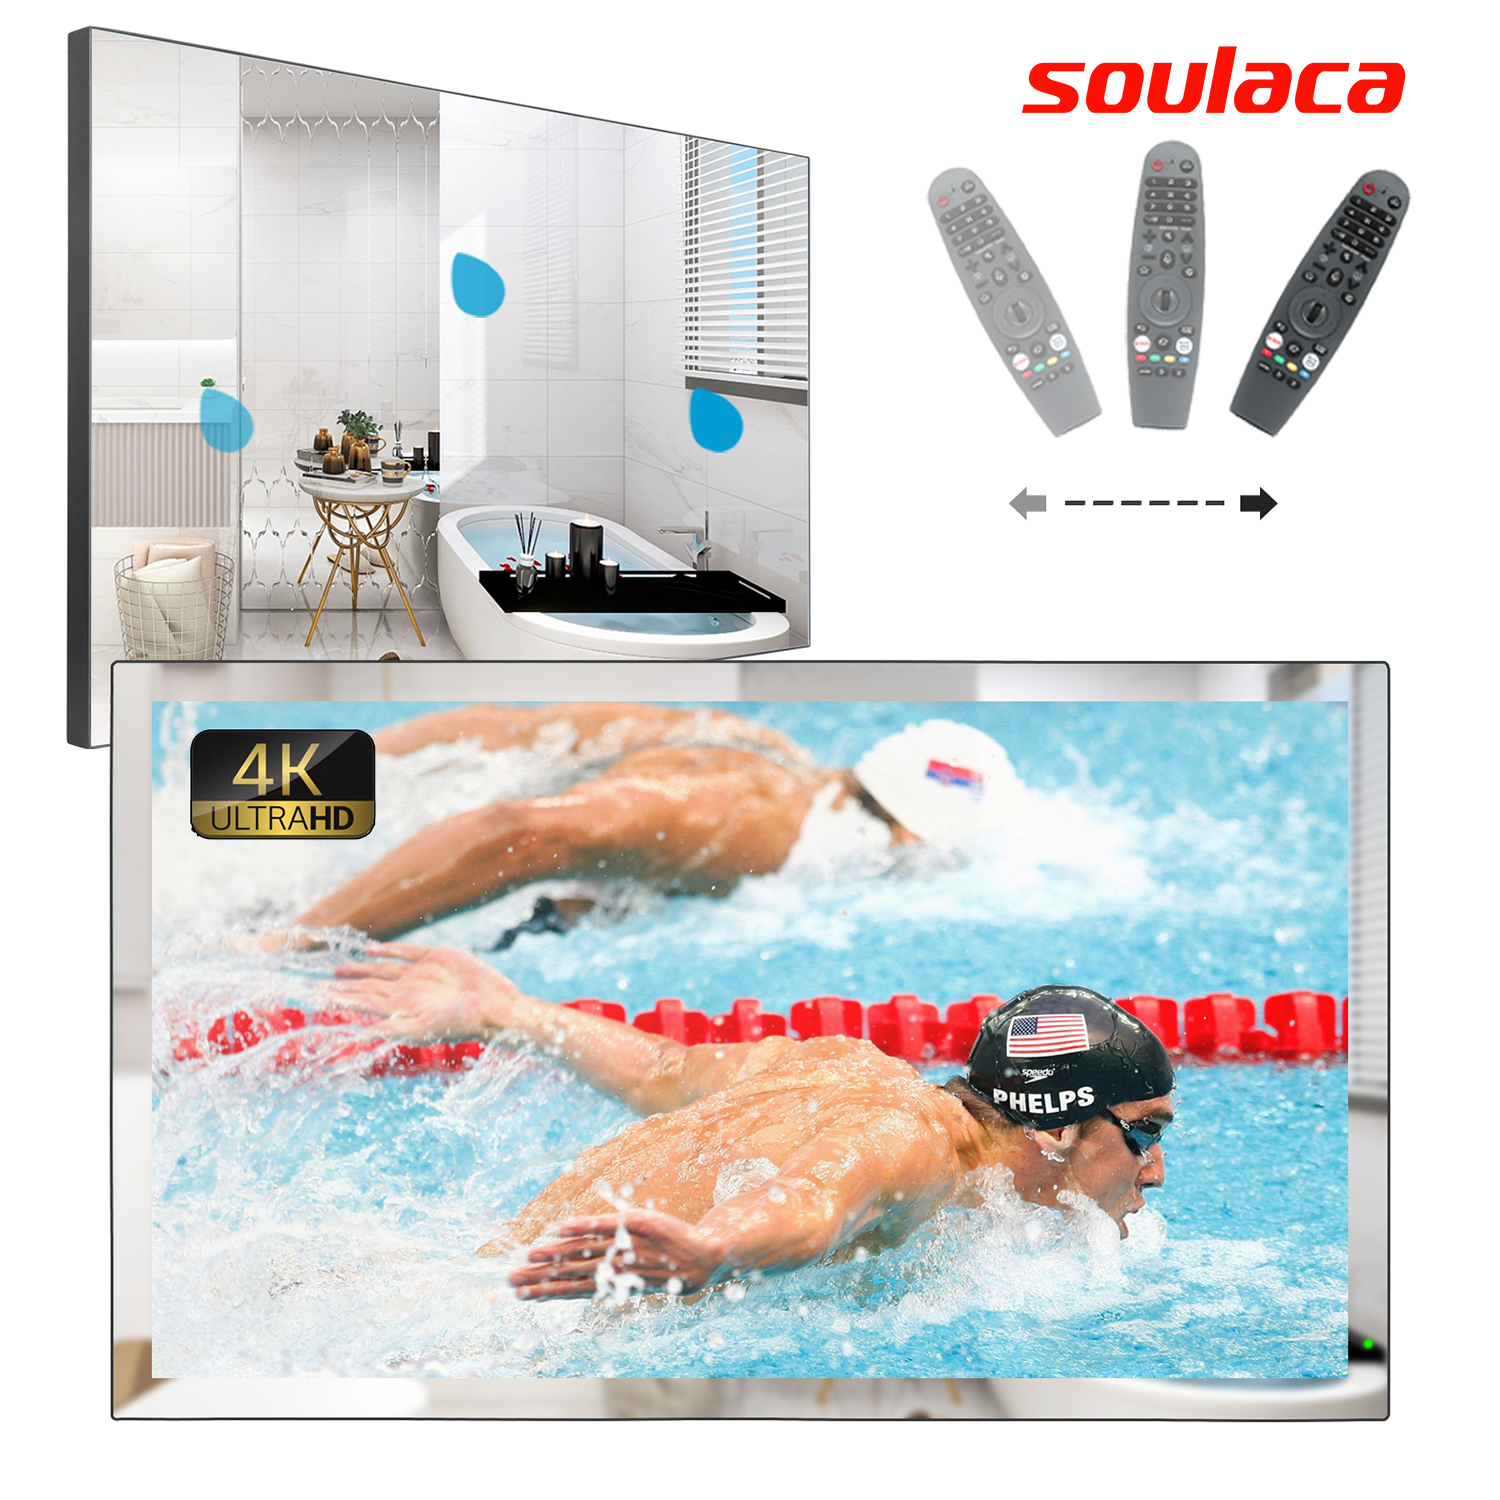 Soulaca 32" inches Smart Magic webOS 4K Mirror LED Bathroom TV Flat Screen Television Built-in WiFi Bluetooth - image 1 of 11